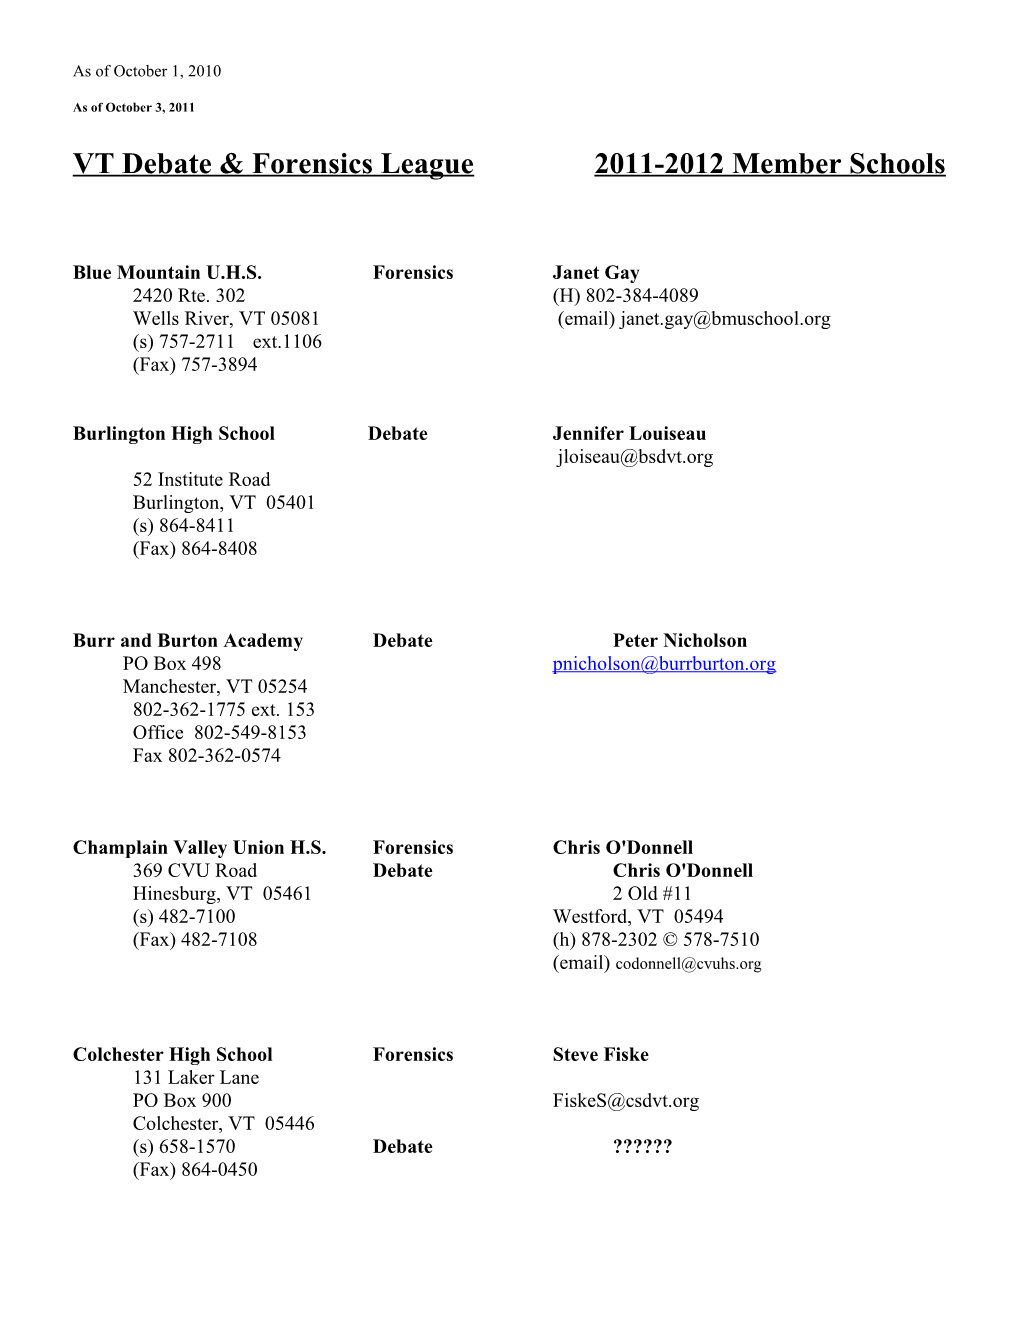 Vermont Debate and Forensics League